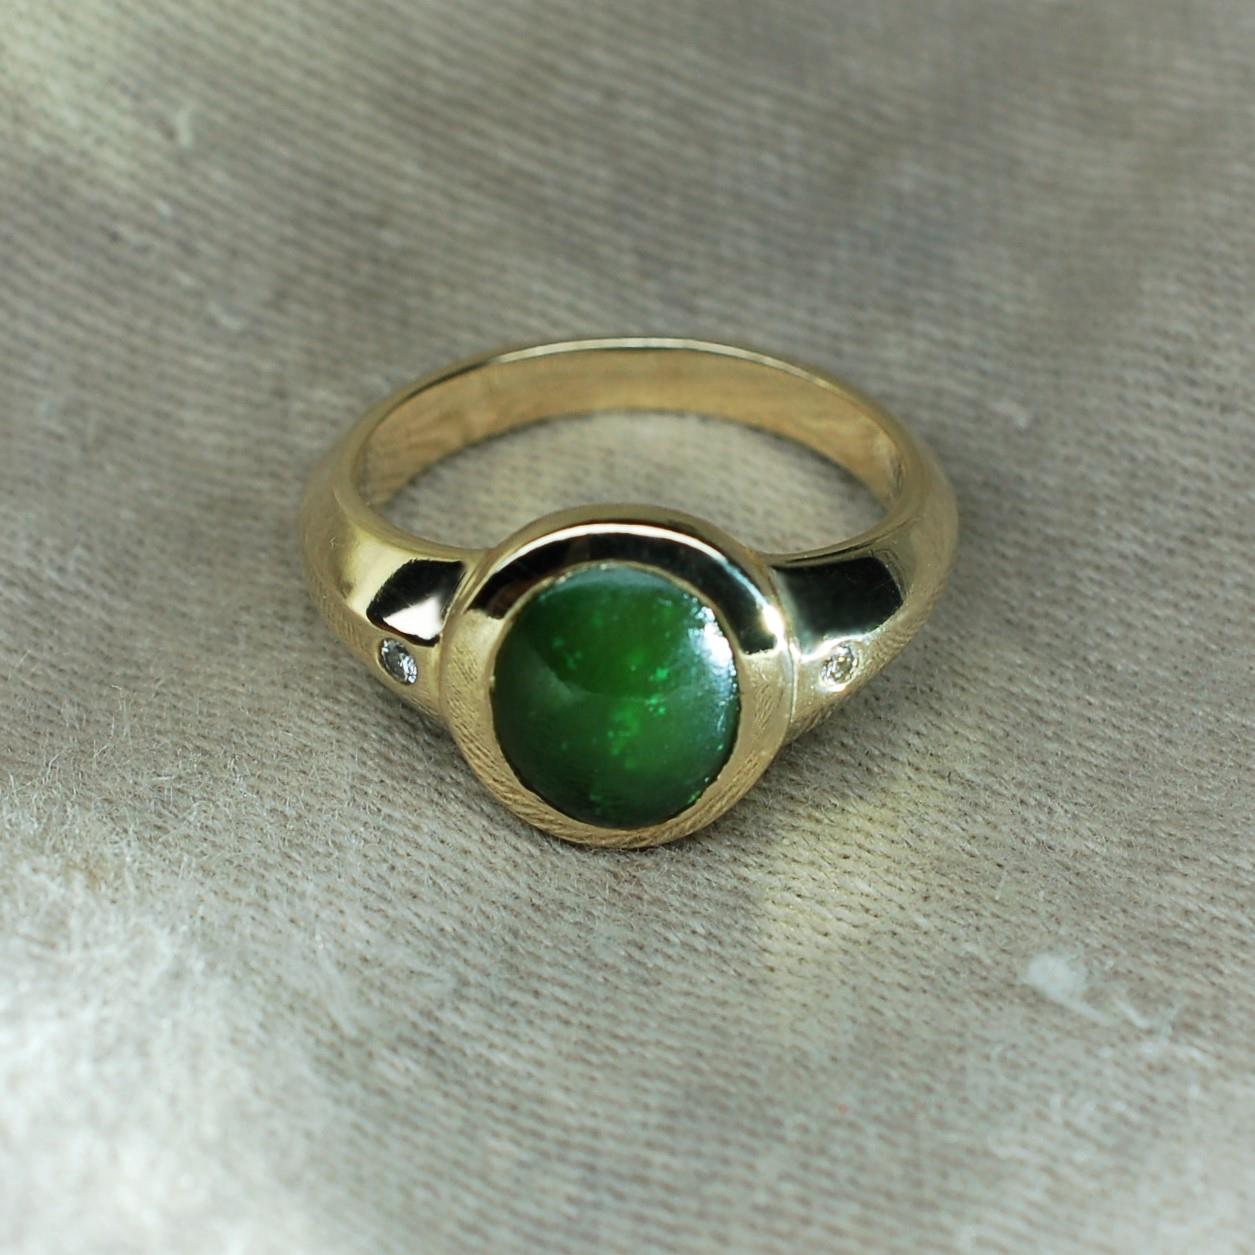 Jade, diamond and gold, Gentleman's or Lady's ring. Handmade in England with London Hallmarks. UK N ½ or US 7. *This piece is ready to be shipped*